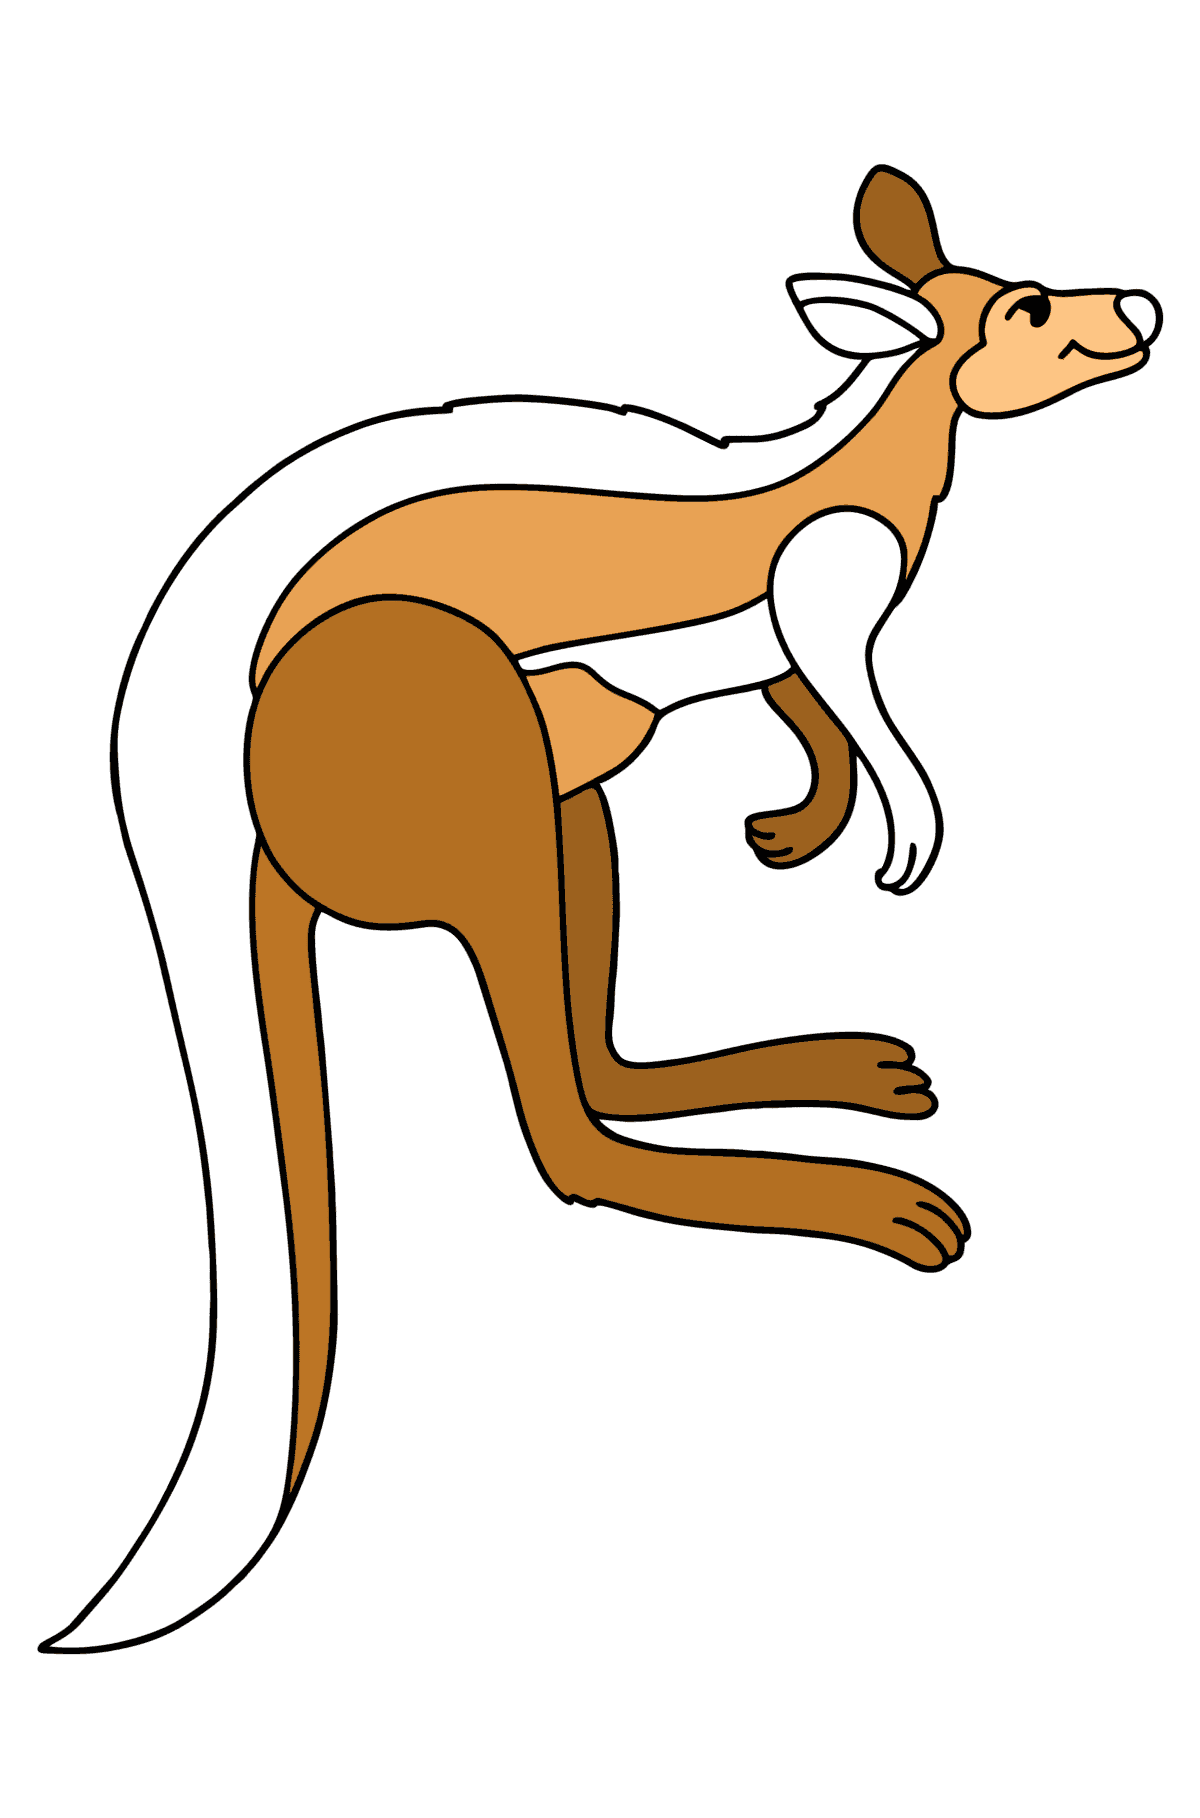 Antelope Kangaroo сolouring page - Coloring Pages for Kids